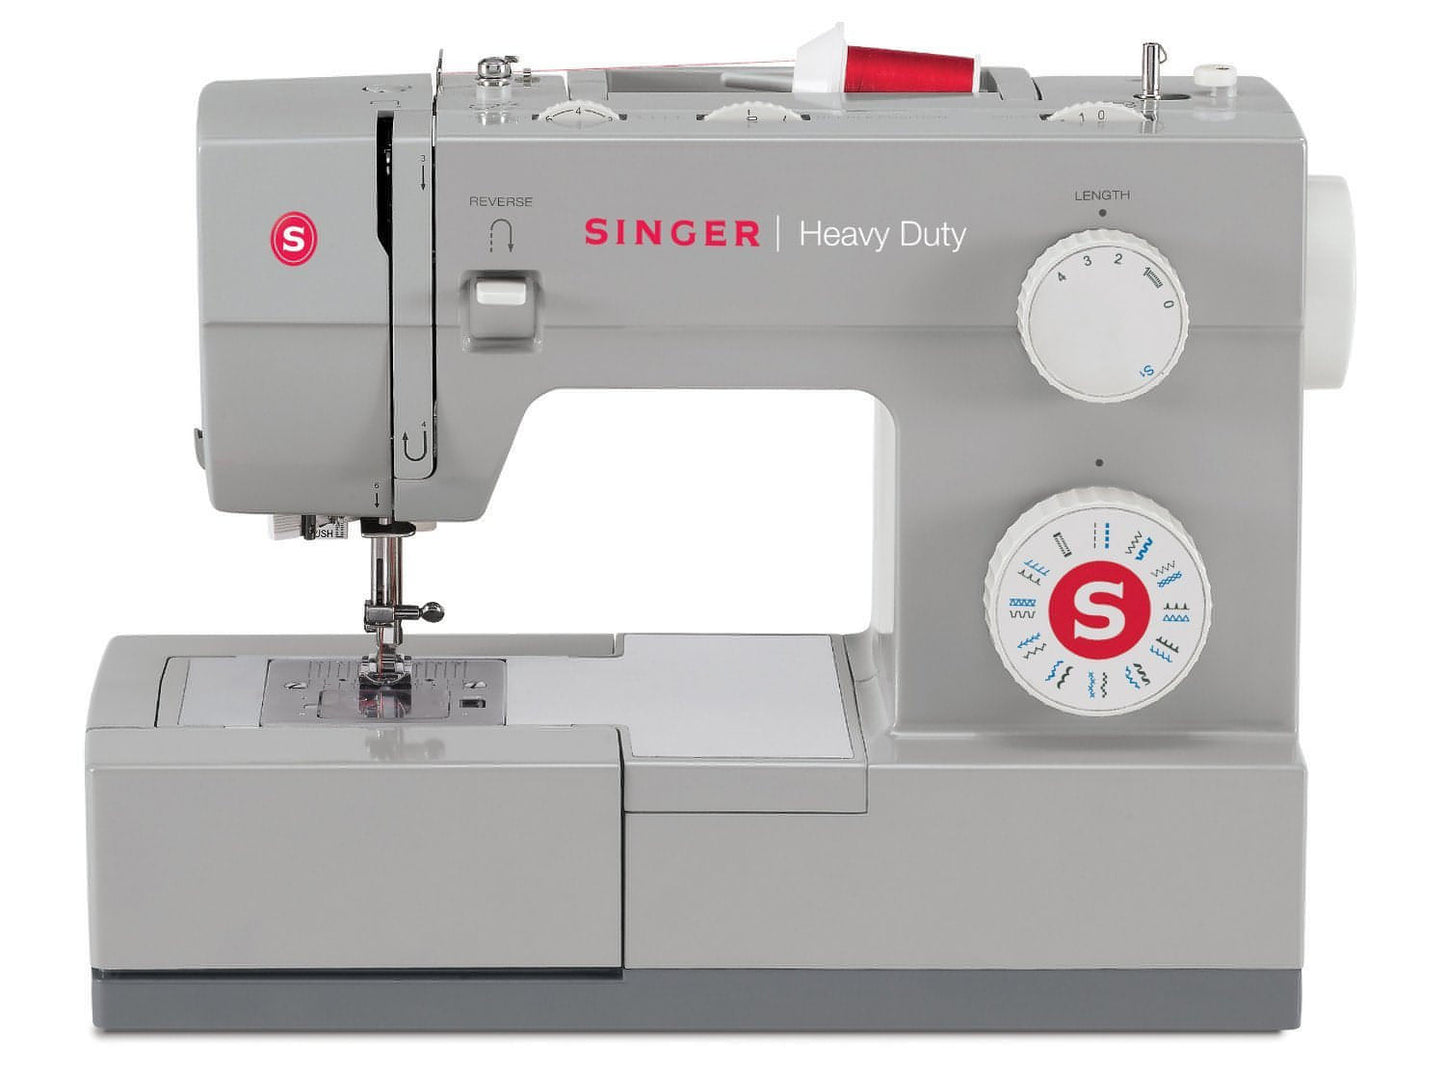 Singer Heavy Duty 4423 XL Bundle Edition - Free Upgrade to 4432 XL model at no extra cost